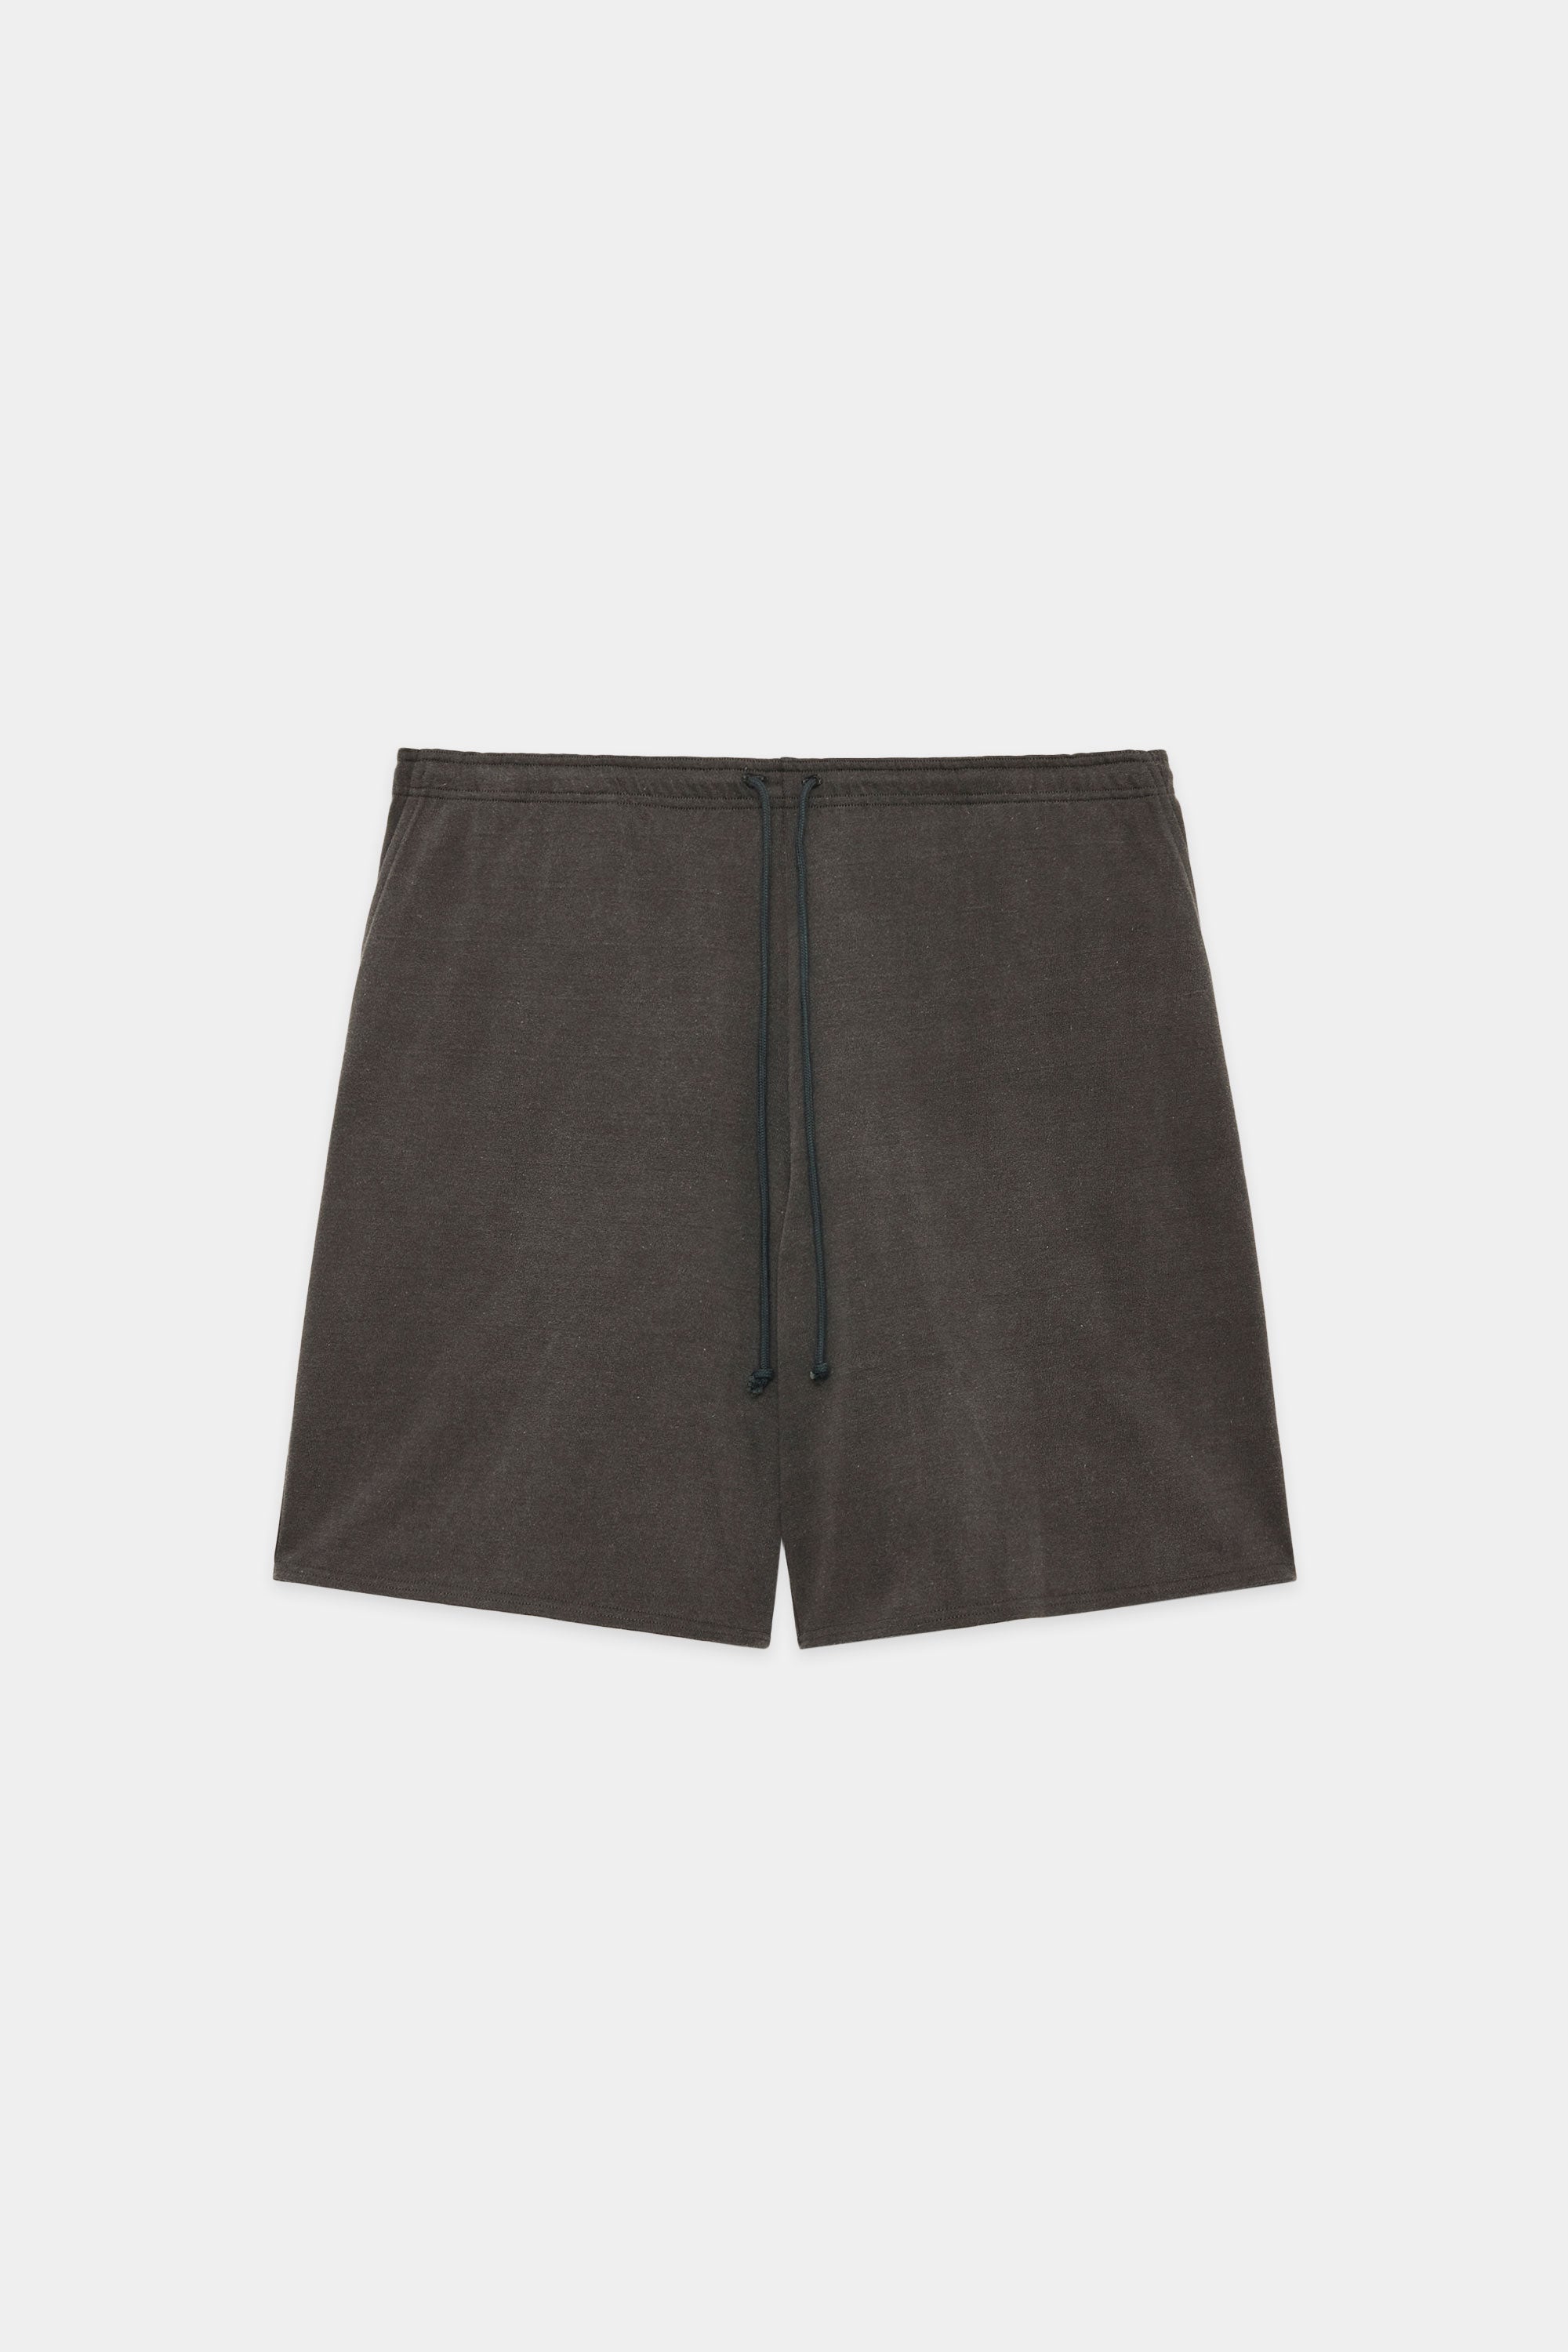 20//1 RECYCLE SUVIN ORGANIC COTTON KNIT EASY SHORTS, Faded Black